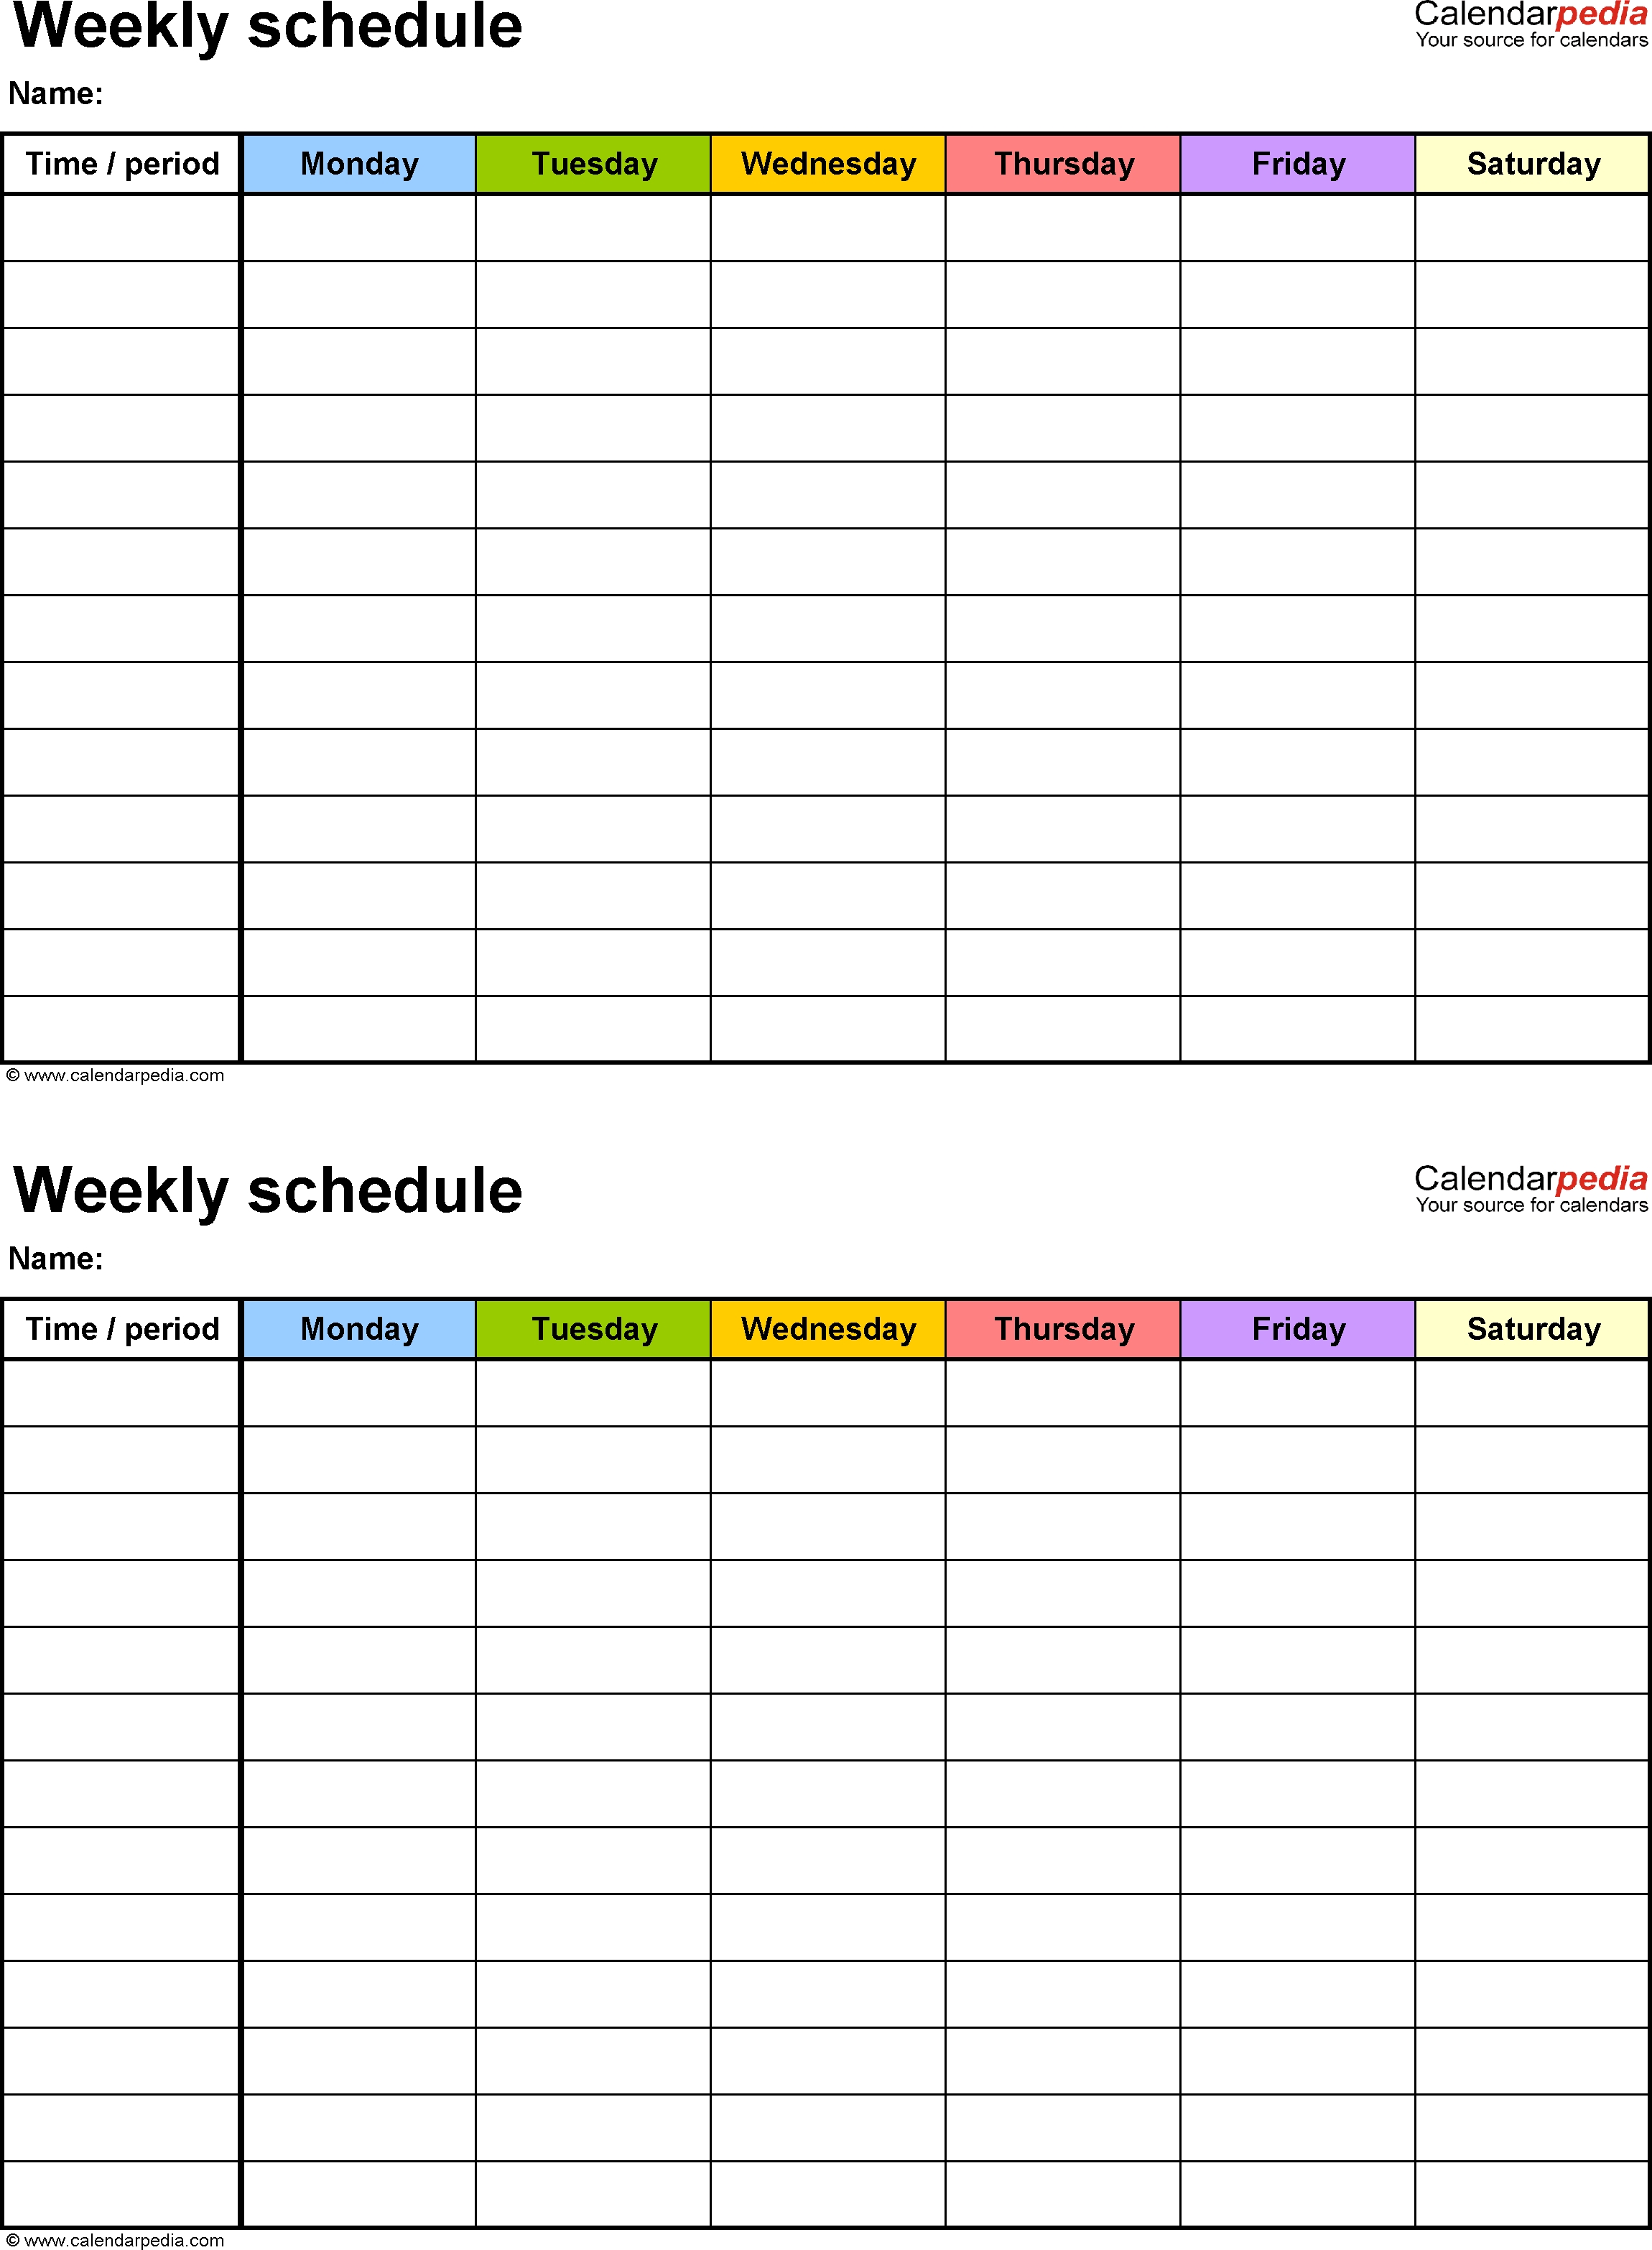 Free Weekly Schedule Templates For Word - 18 Templates-Summer Camp Template Calendar For Word